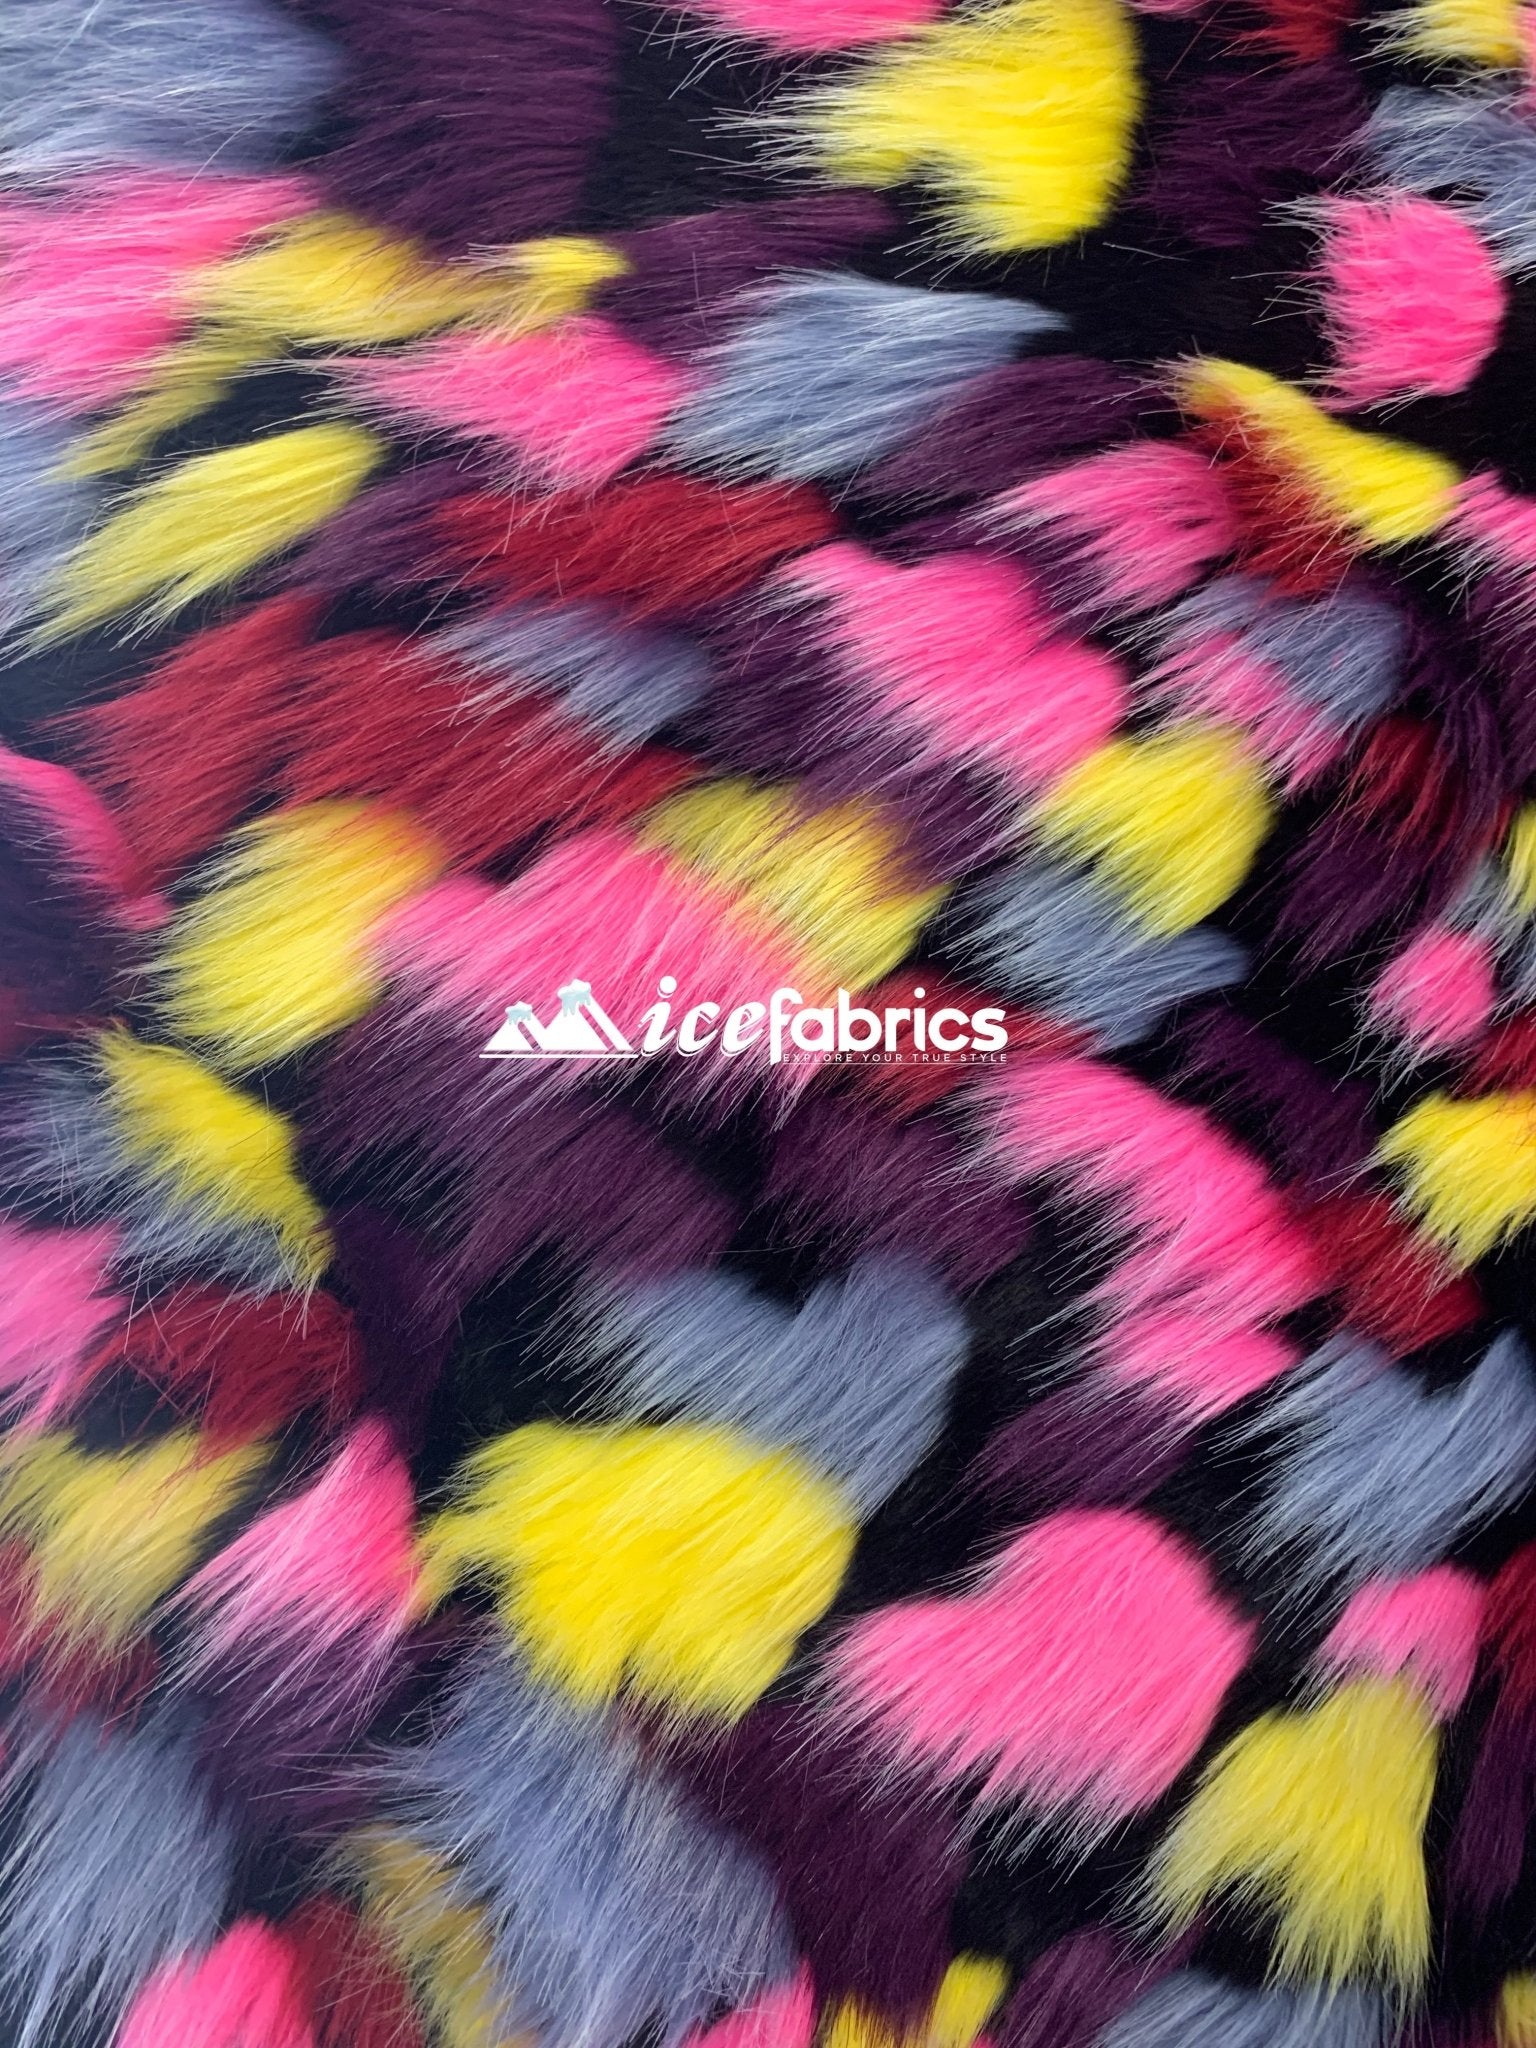 Yellow, Burgundy, Purple, Gray, and Black Pastel Rainbow Faux Fur Fabric By The YardICEFABRICICE FABRICSBy The Yard (60 inches Wide)Yellow, Burgundy, Purple, Gray, and Black Pastel Rainbow Faux Fur Fabric By The Yard ICEFABRIC